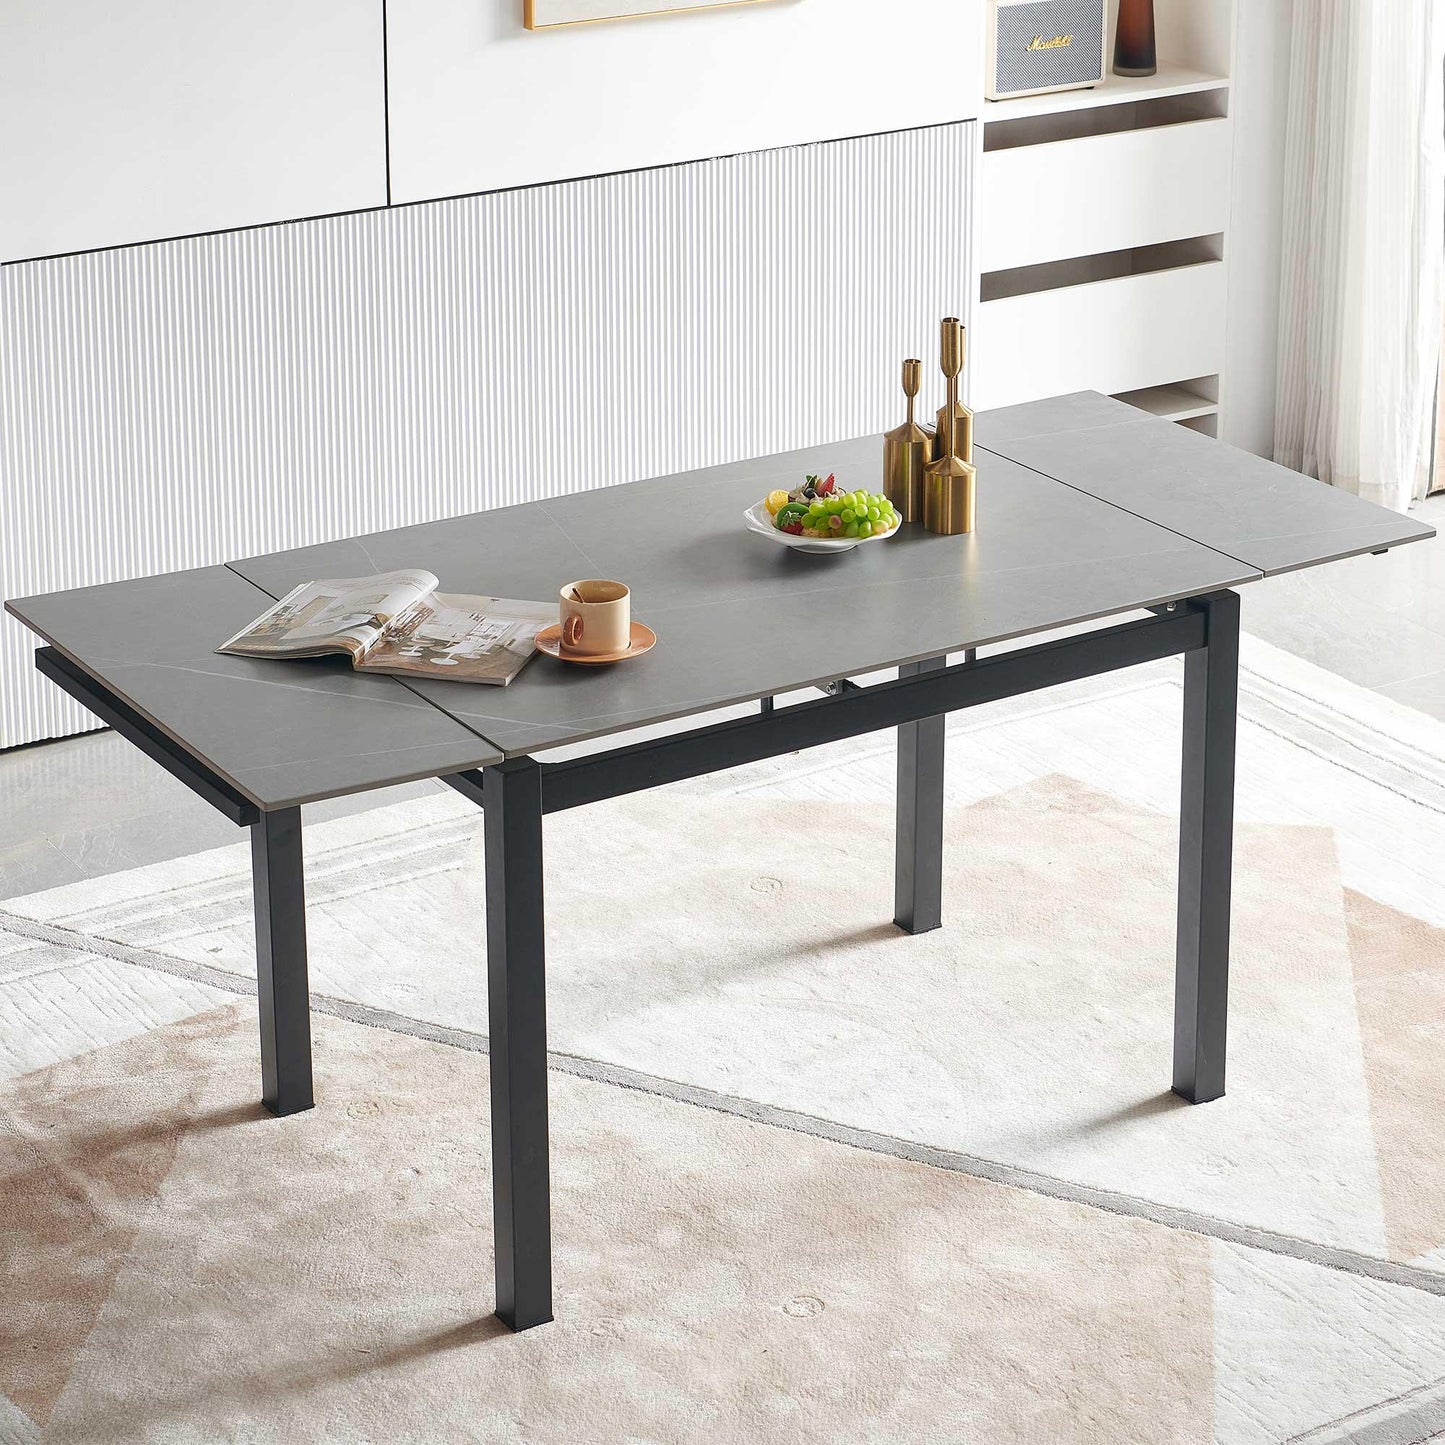 Grey Ceramic Modern Rectangular Expandable Dining Room Table For Space-Saving Kitchen Small Space -Table - FurniFindUSA